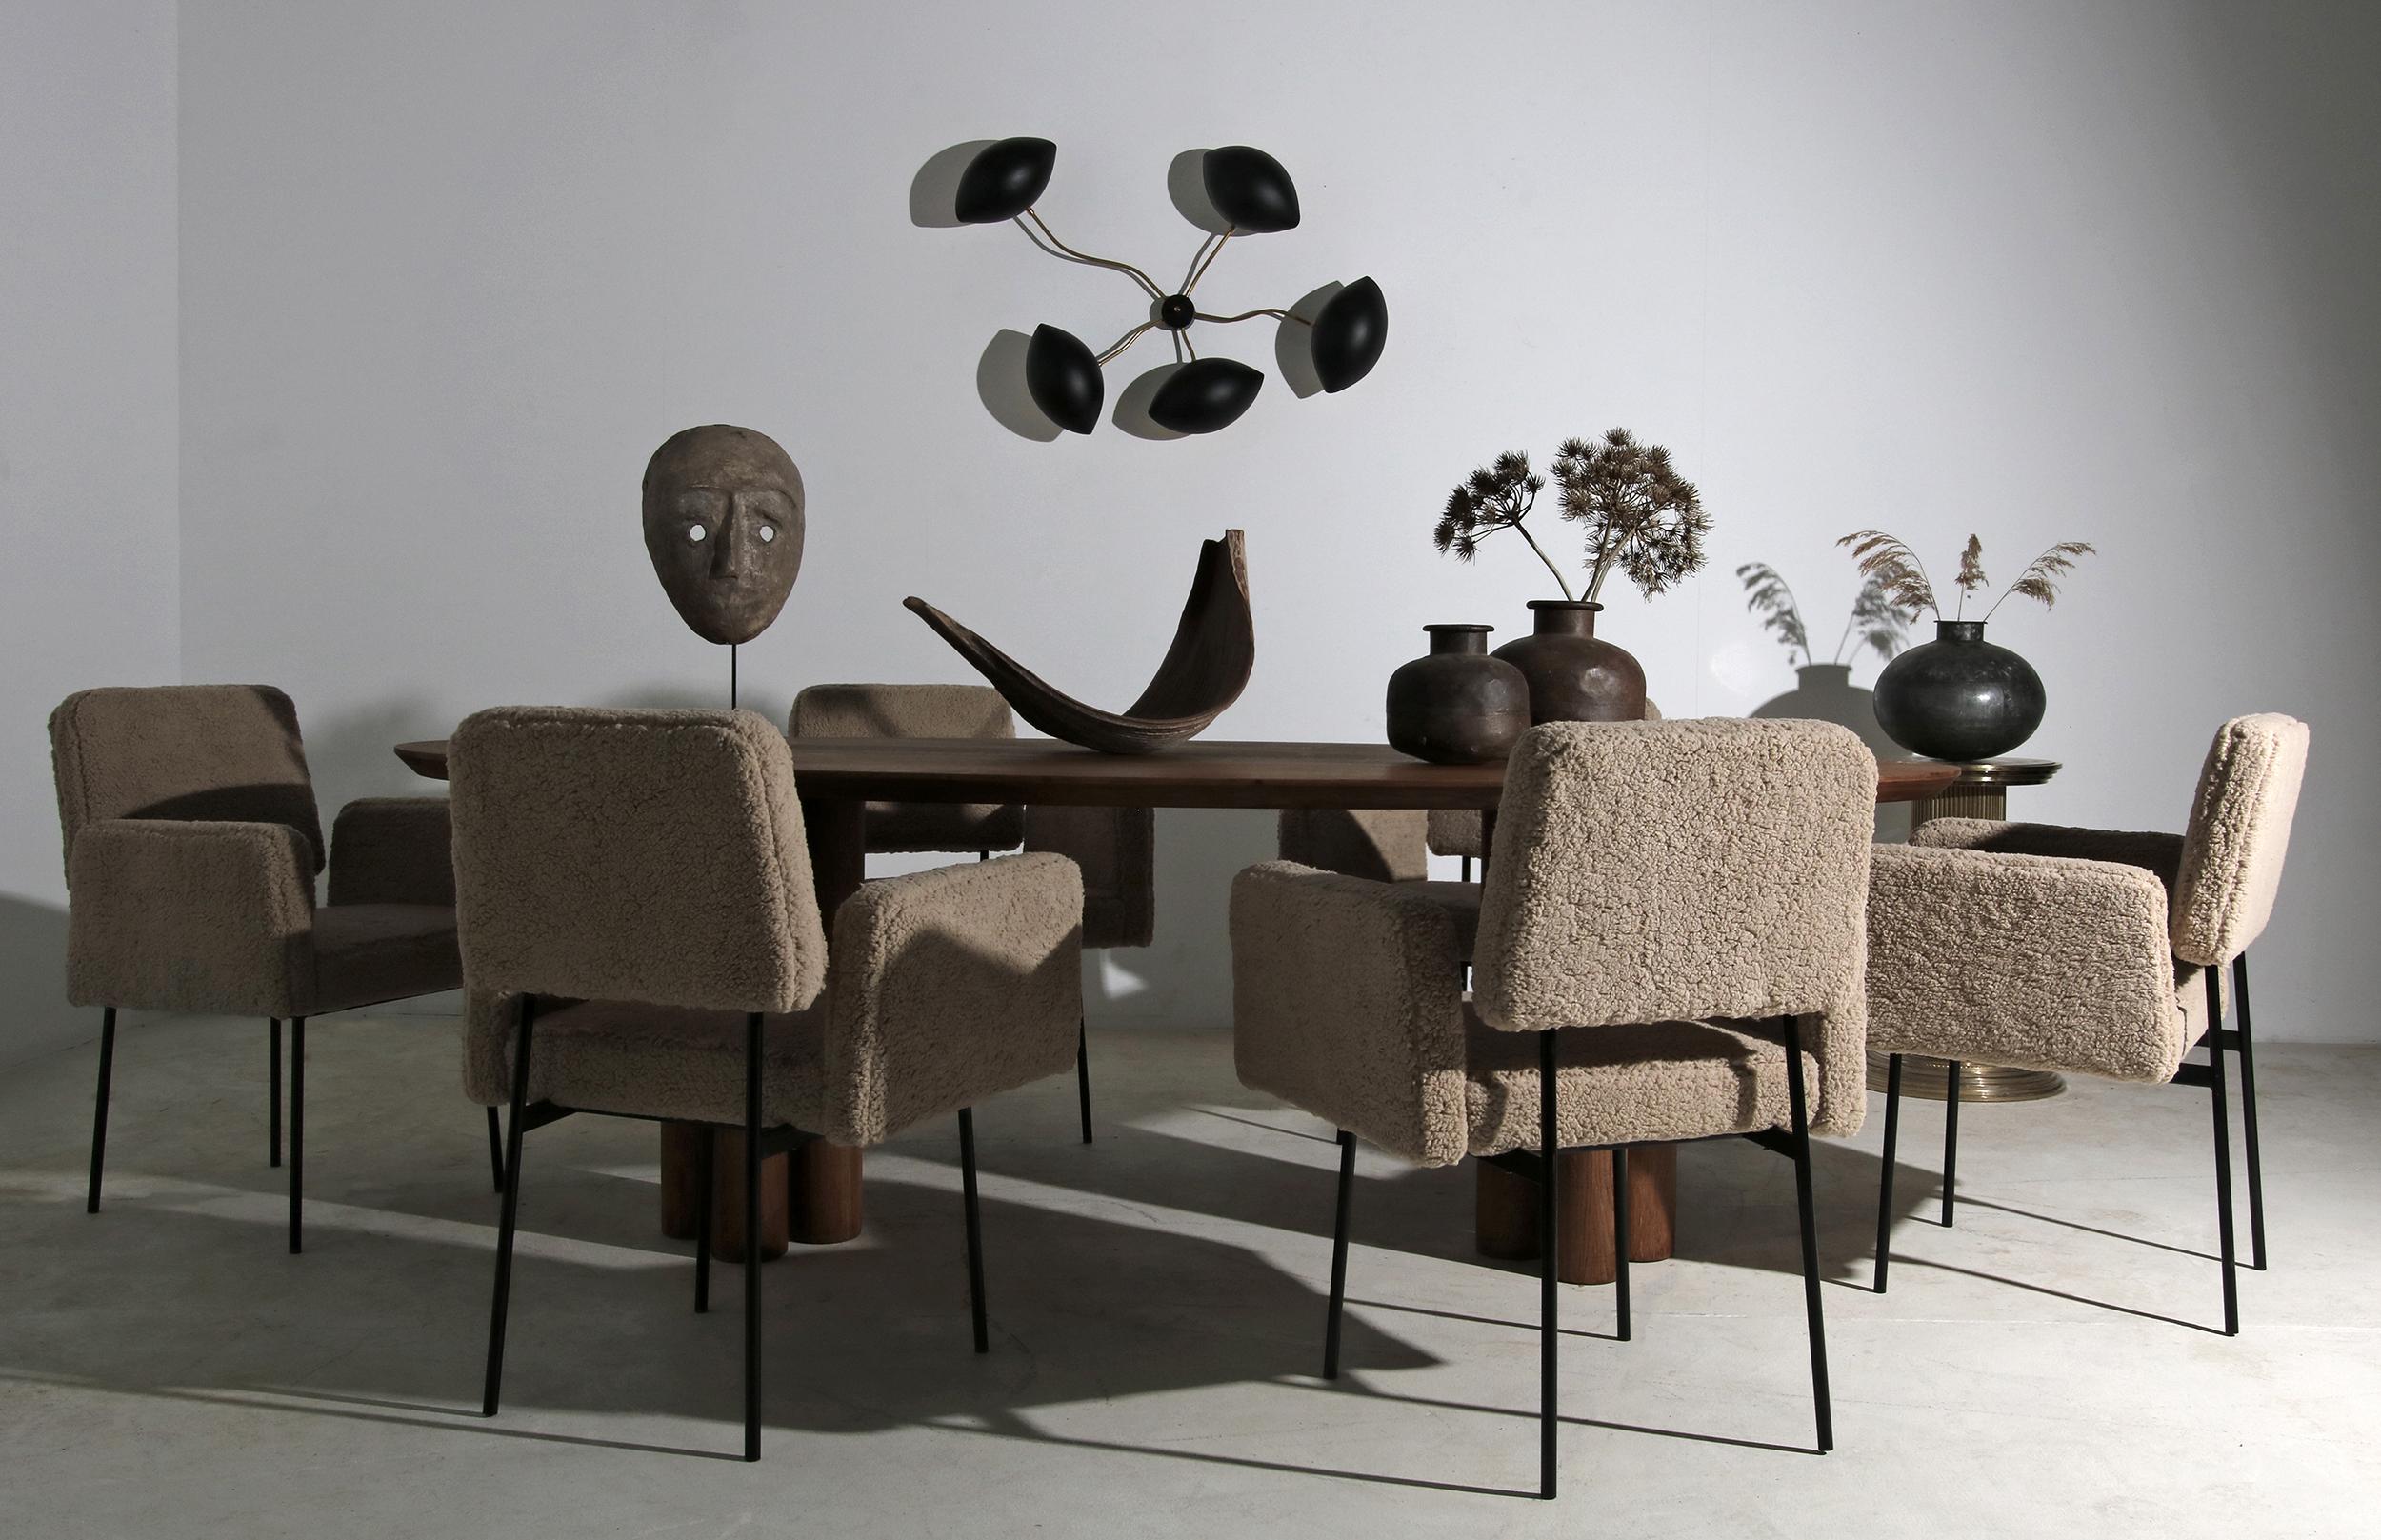 Contemporary 1 of 10 Dining Room Chairs, Armchair Nathan Lindberg Teddy Bear Fur, Metal Base